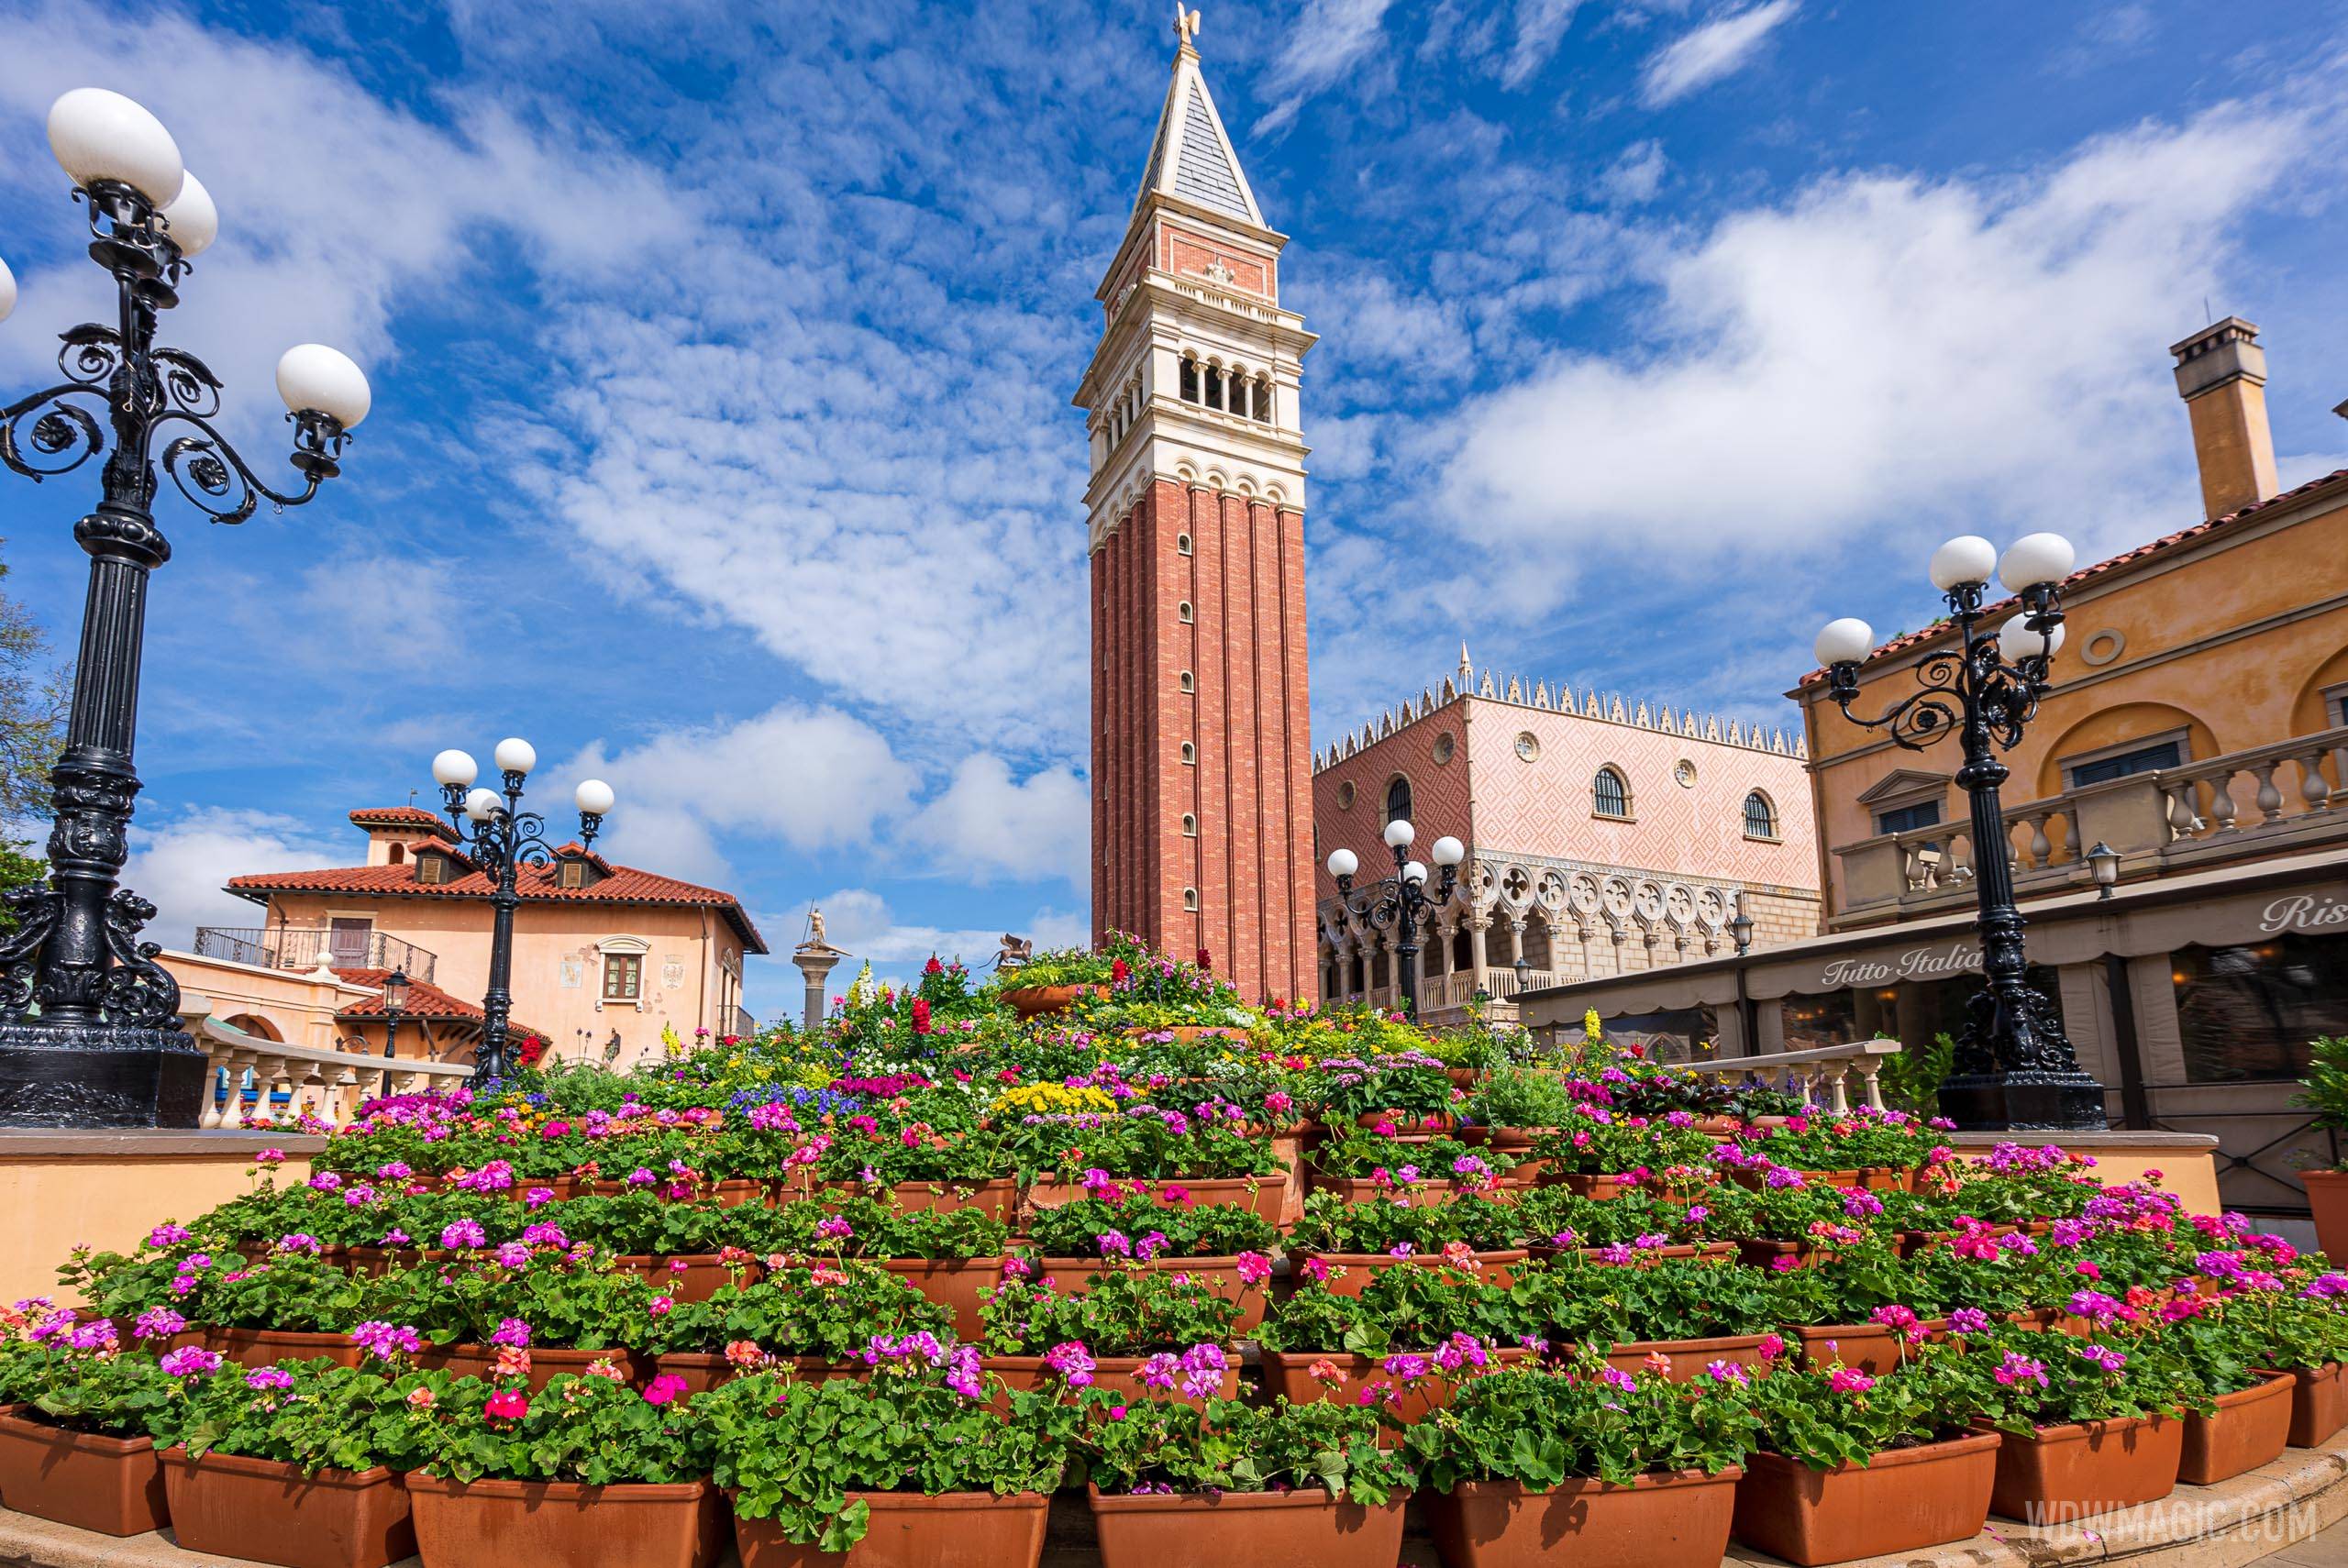 PHOTOS - Floral display takes to the plaza at the Italy Pavilion